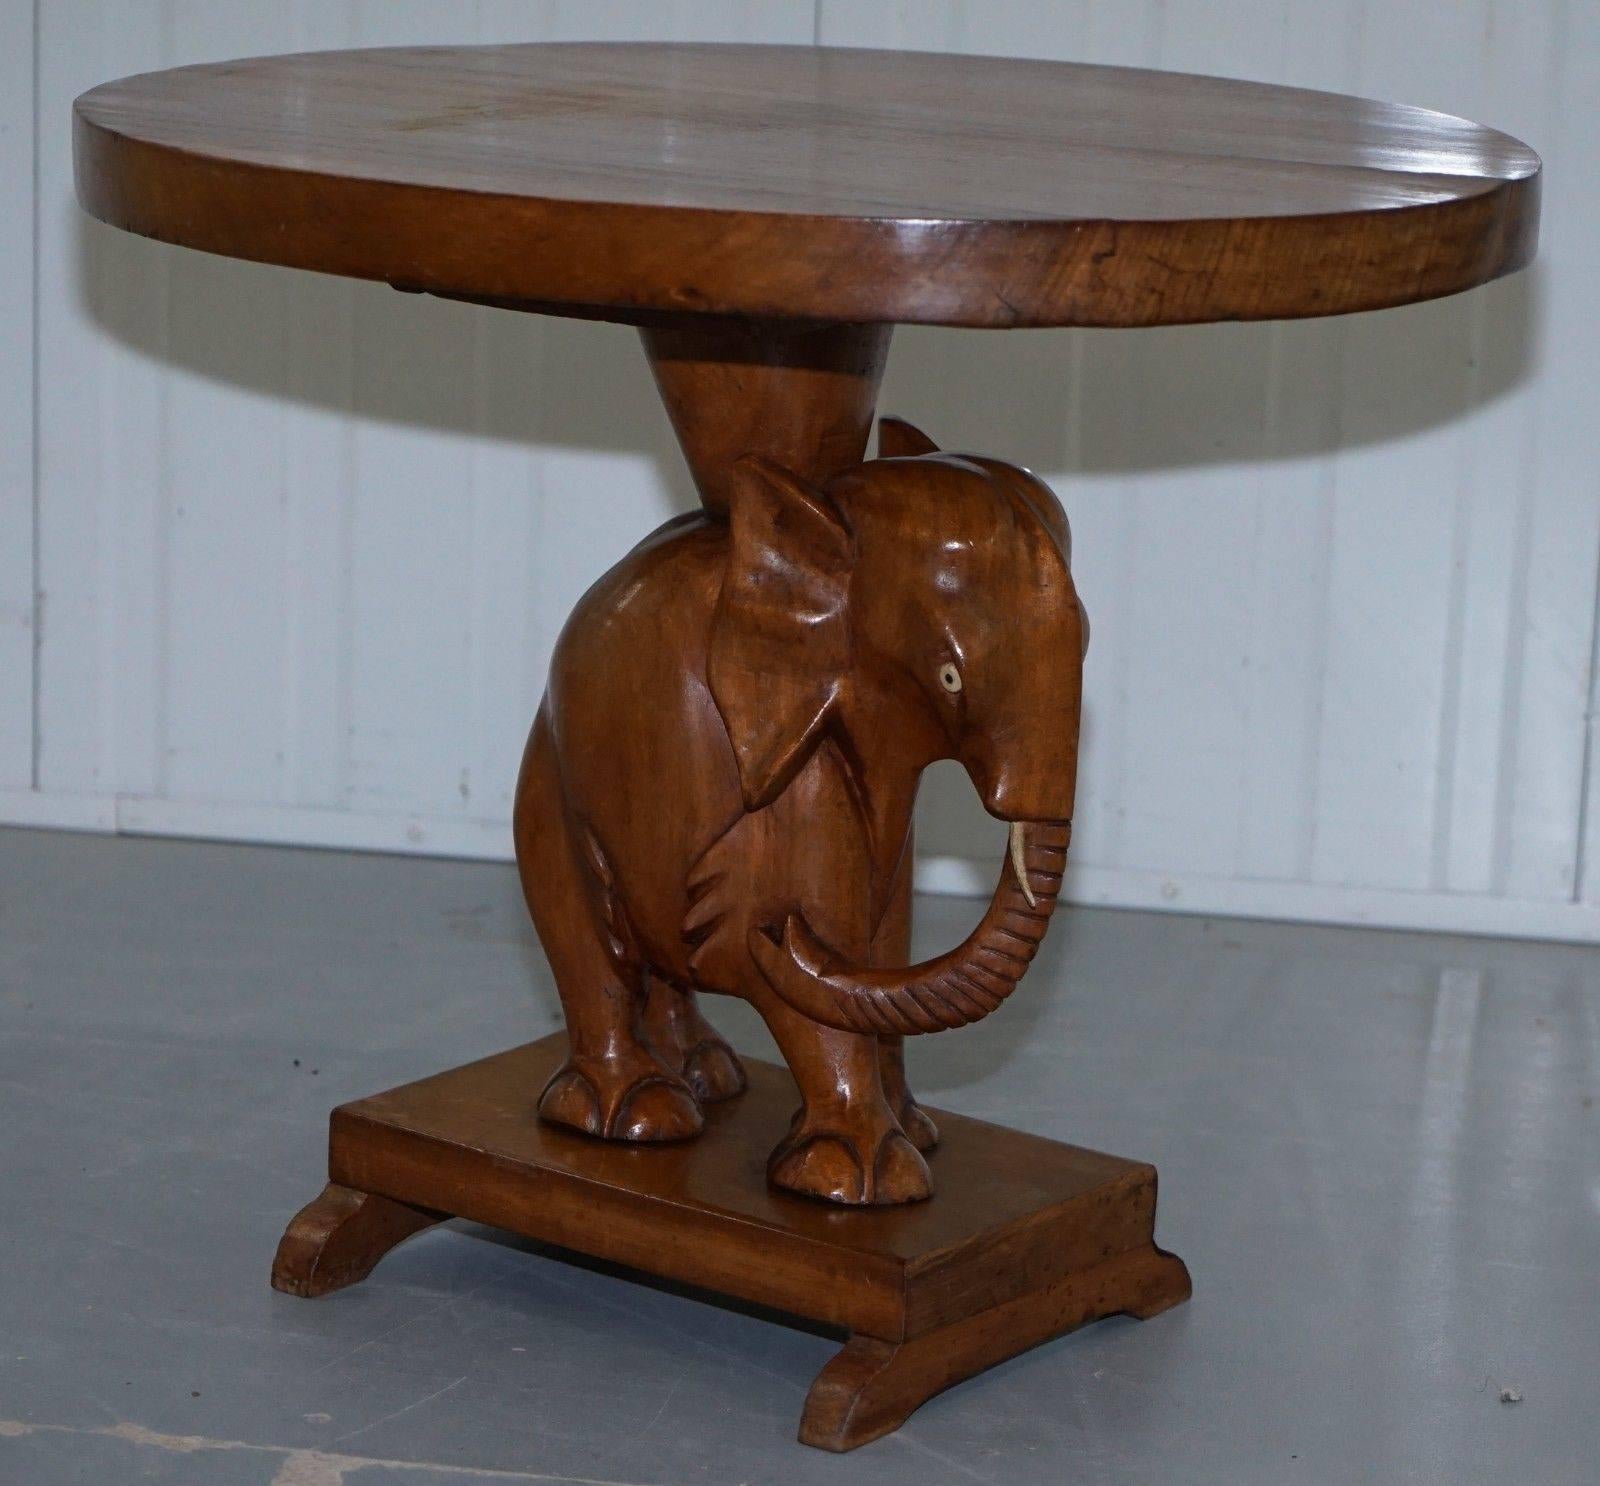 We are delighted to offer for sale this very nice handmade Chinese elephant solid teak occasional side table

A very good looking and well-made piece in lightly restored vintage condition, the table has wear on the top in the form of a timber